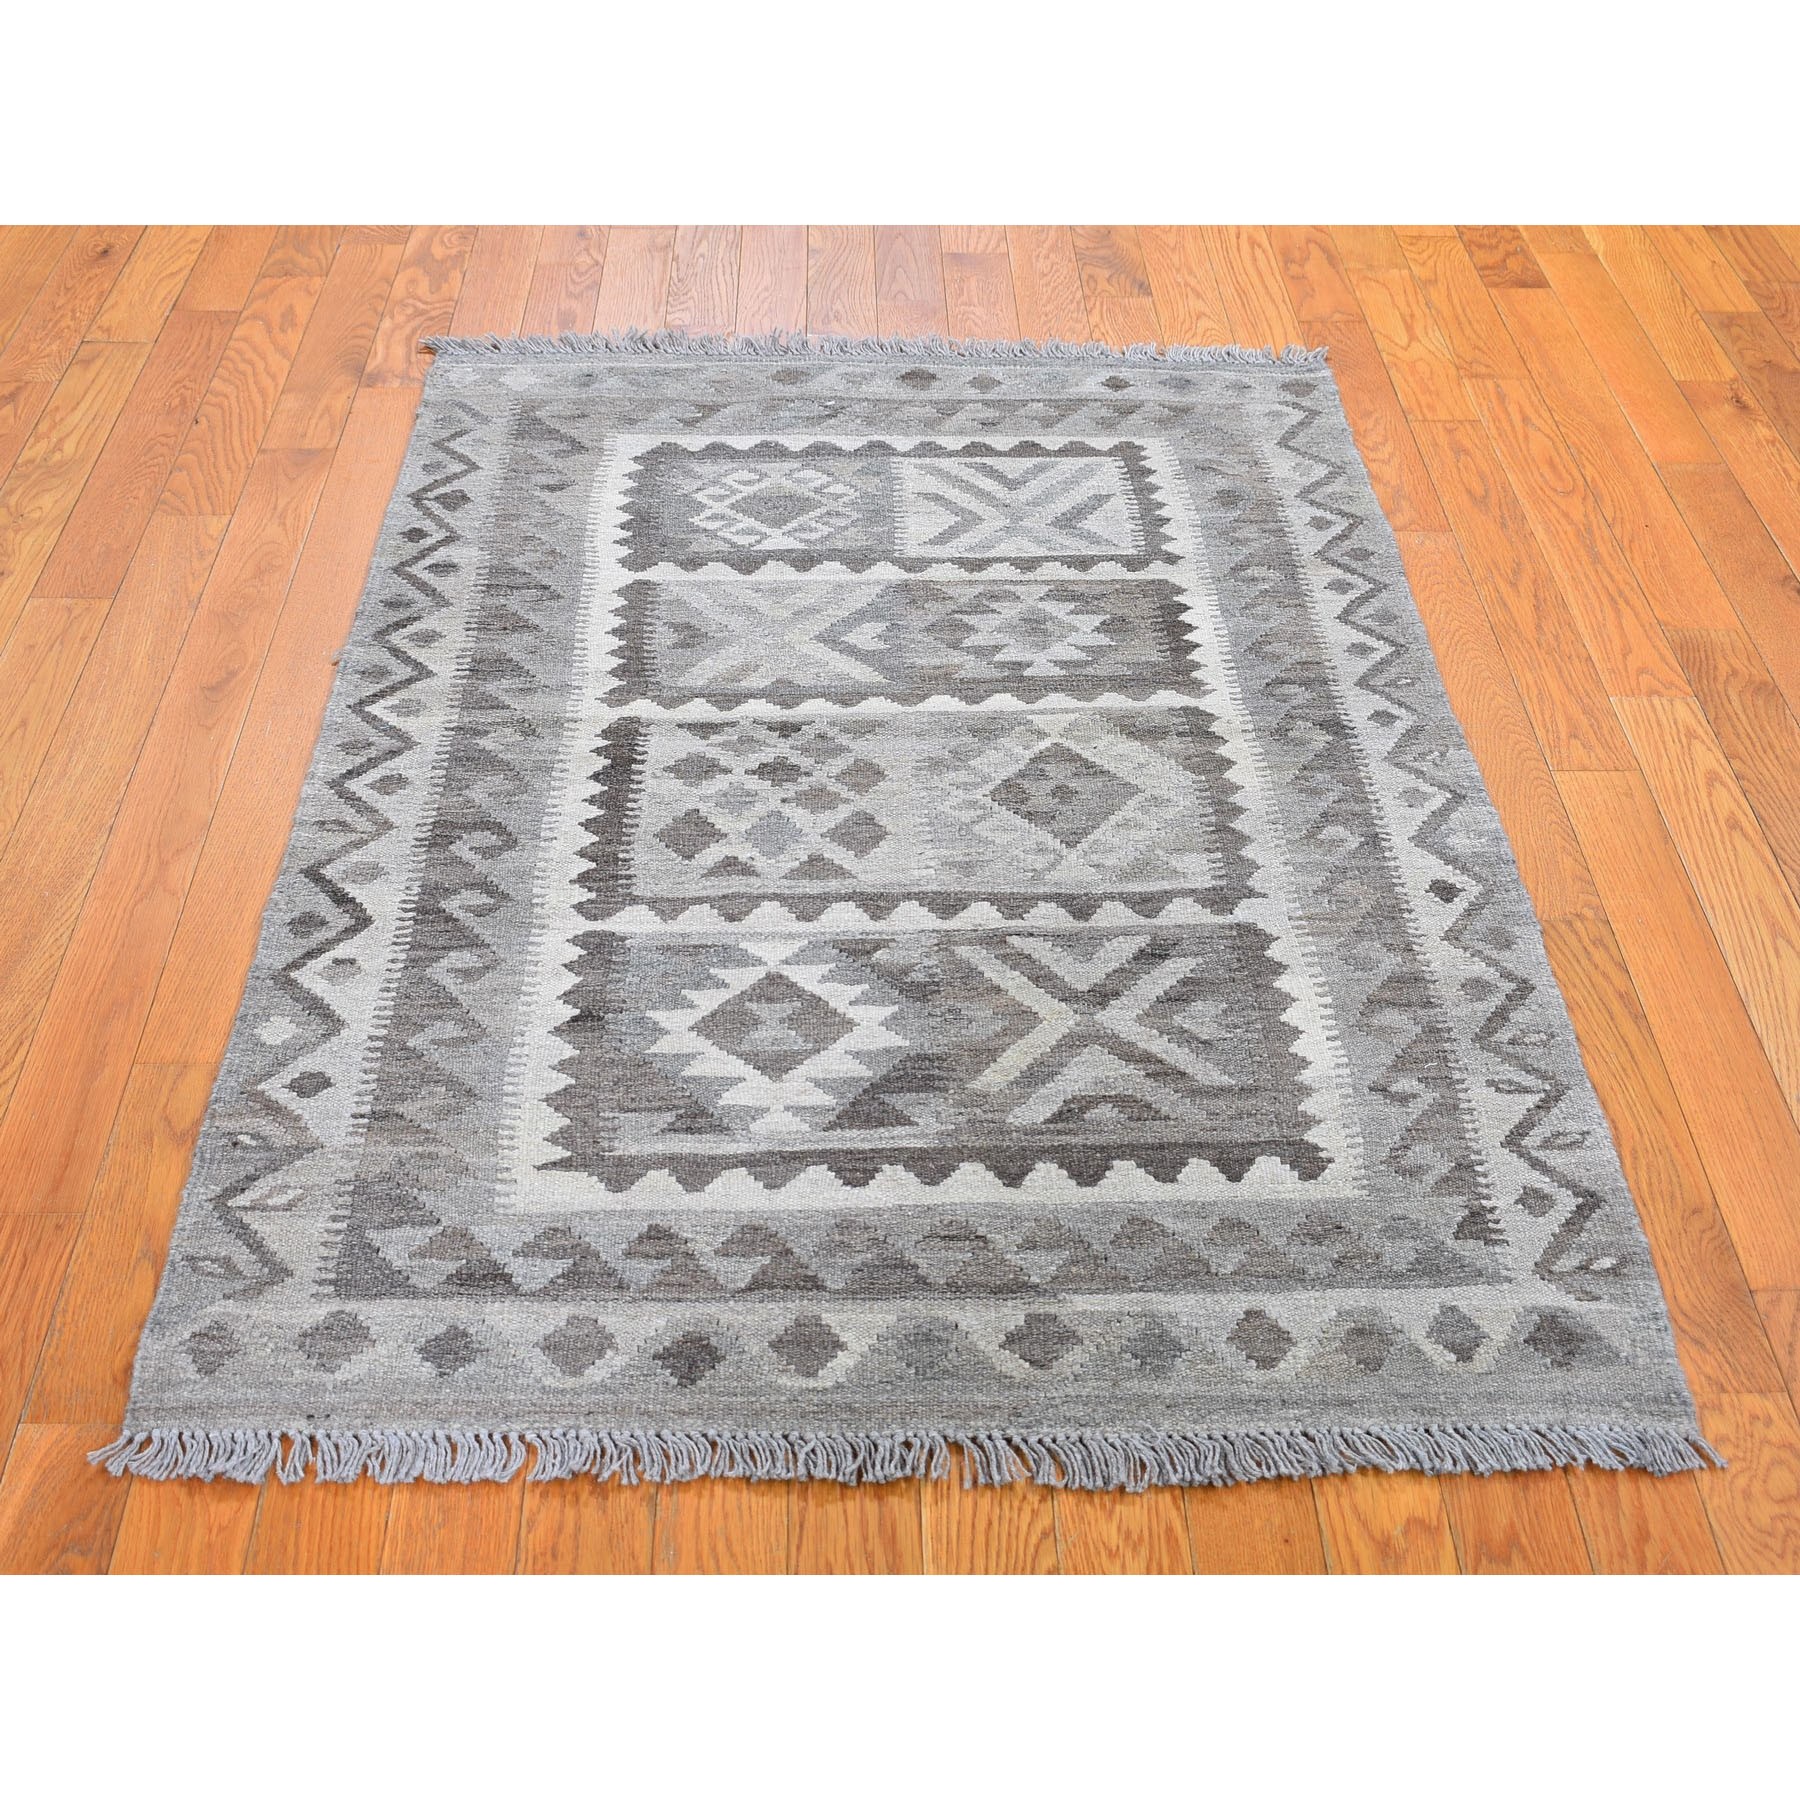 3-4 x5- Undyed Natural Wool Afghan Kilim Reversible Hand Woven Oriental Rug 